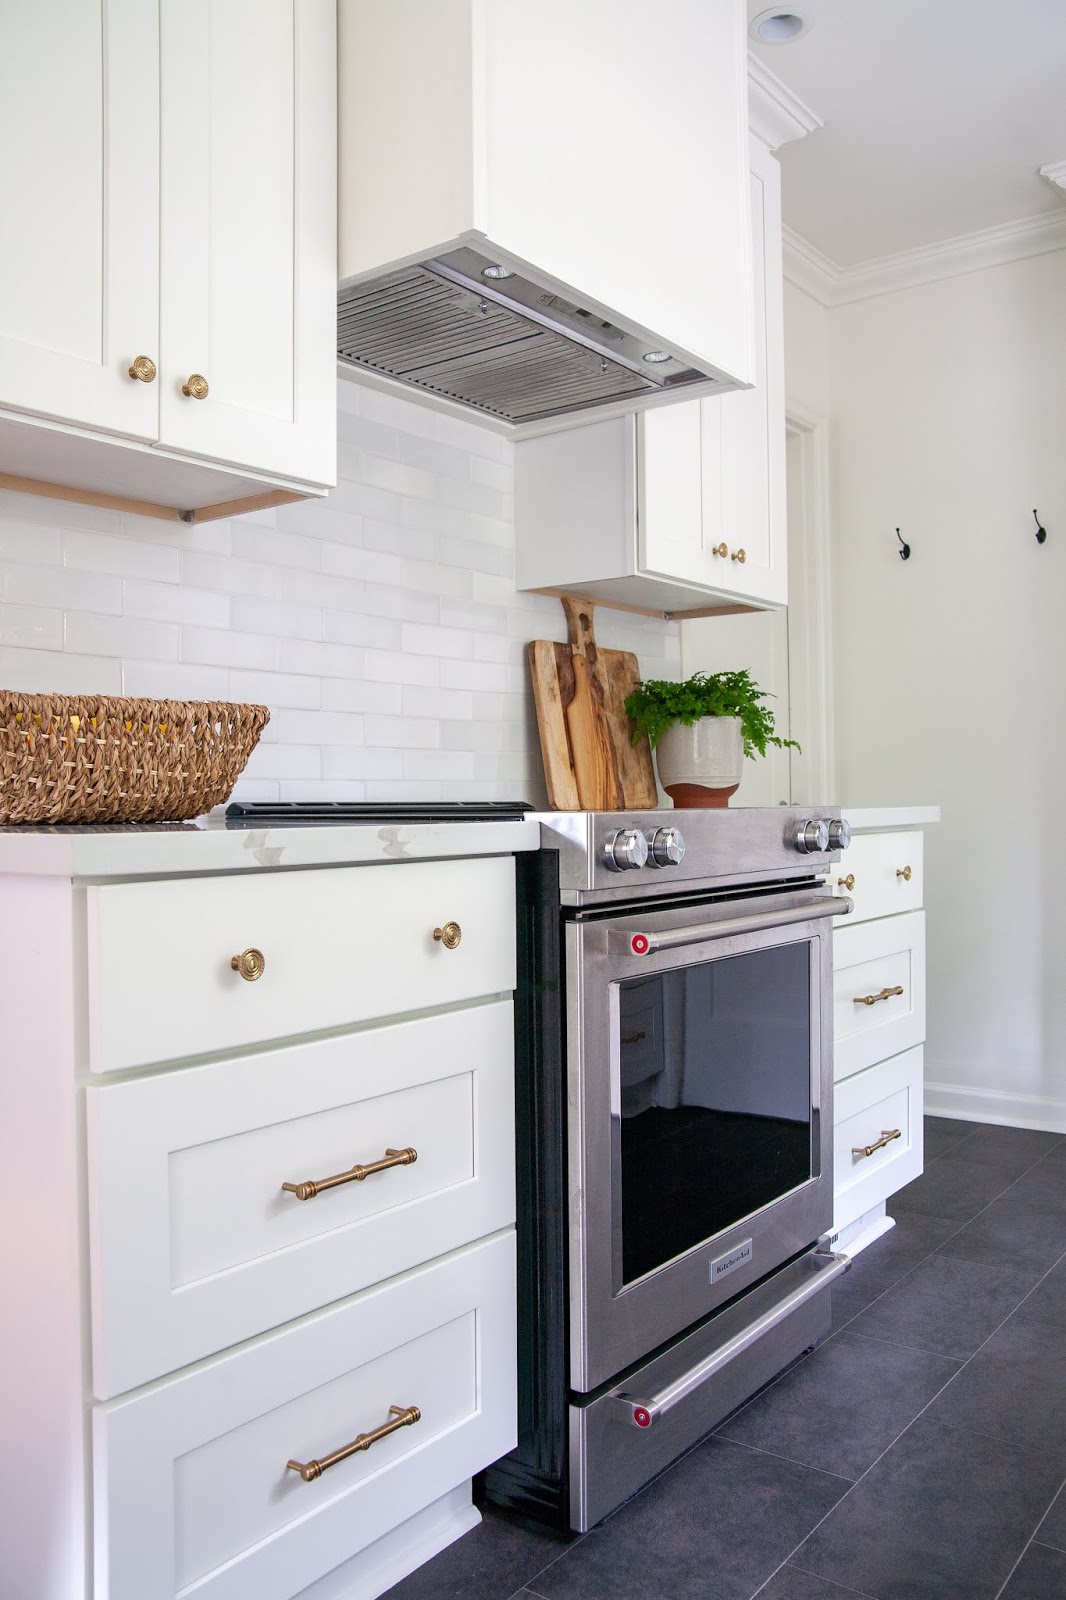 How To Save 4k On Appliances For A Full Kitchen Reno With Sears